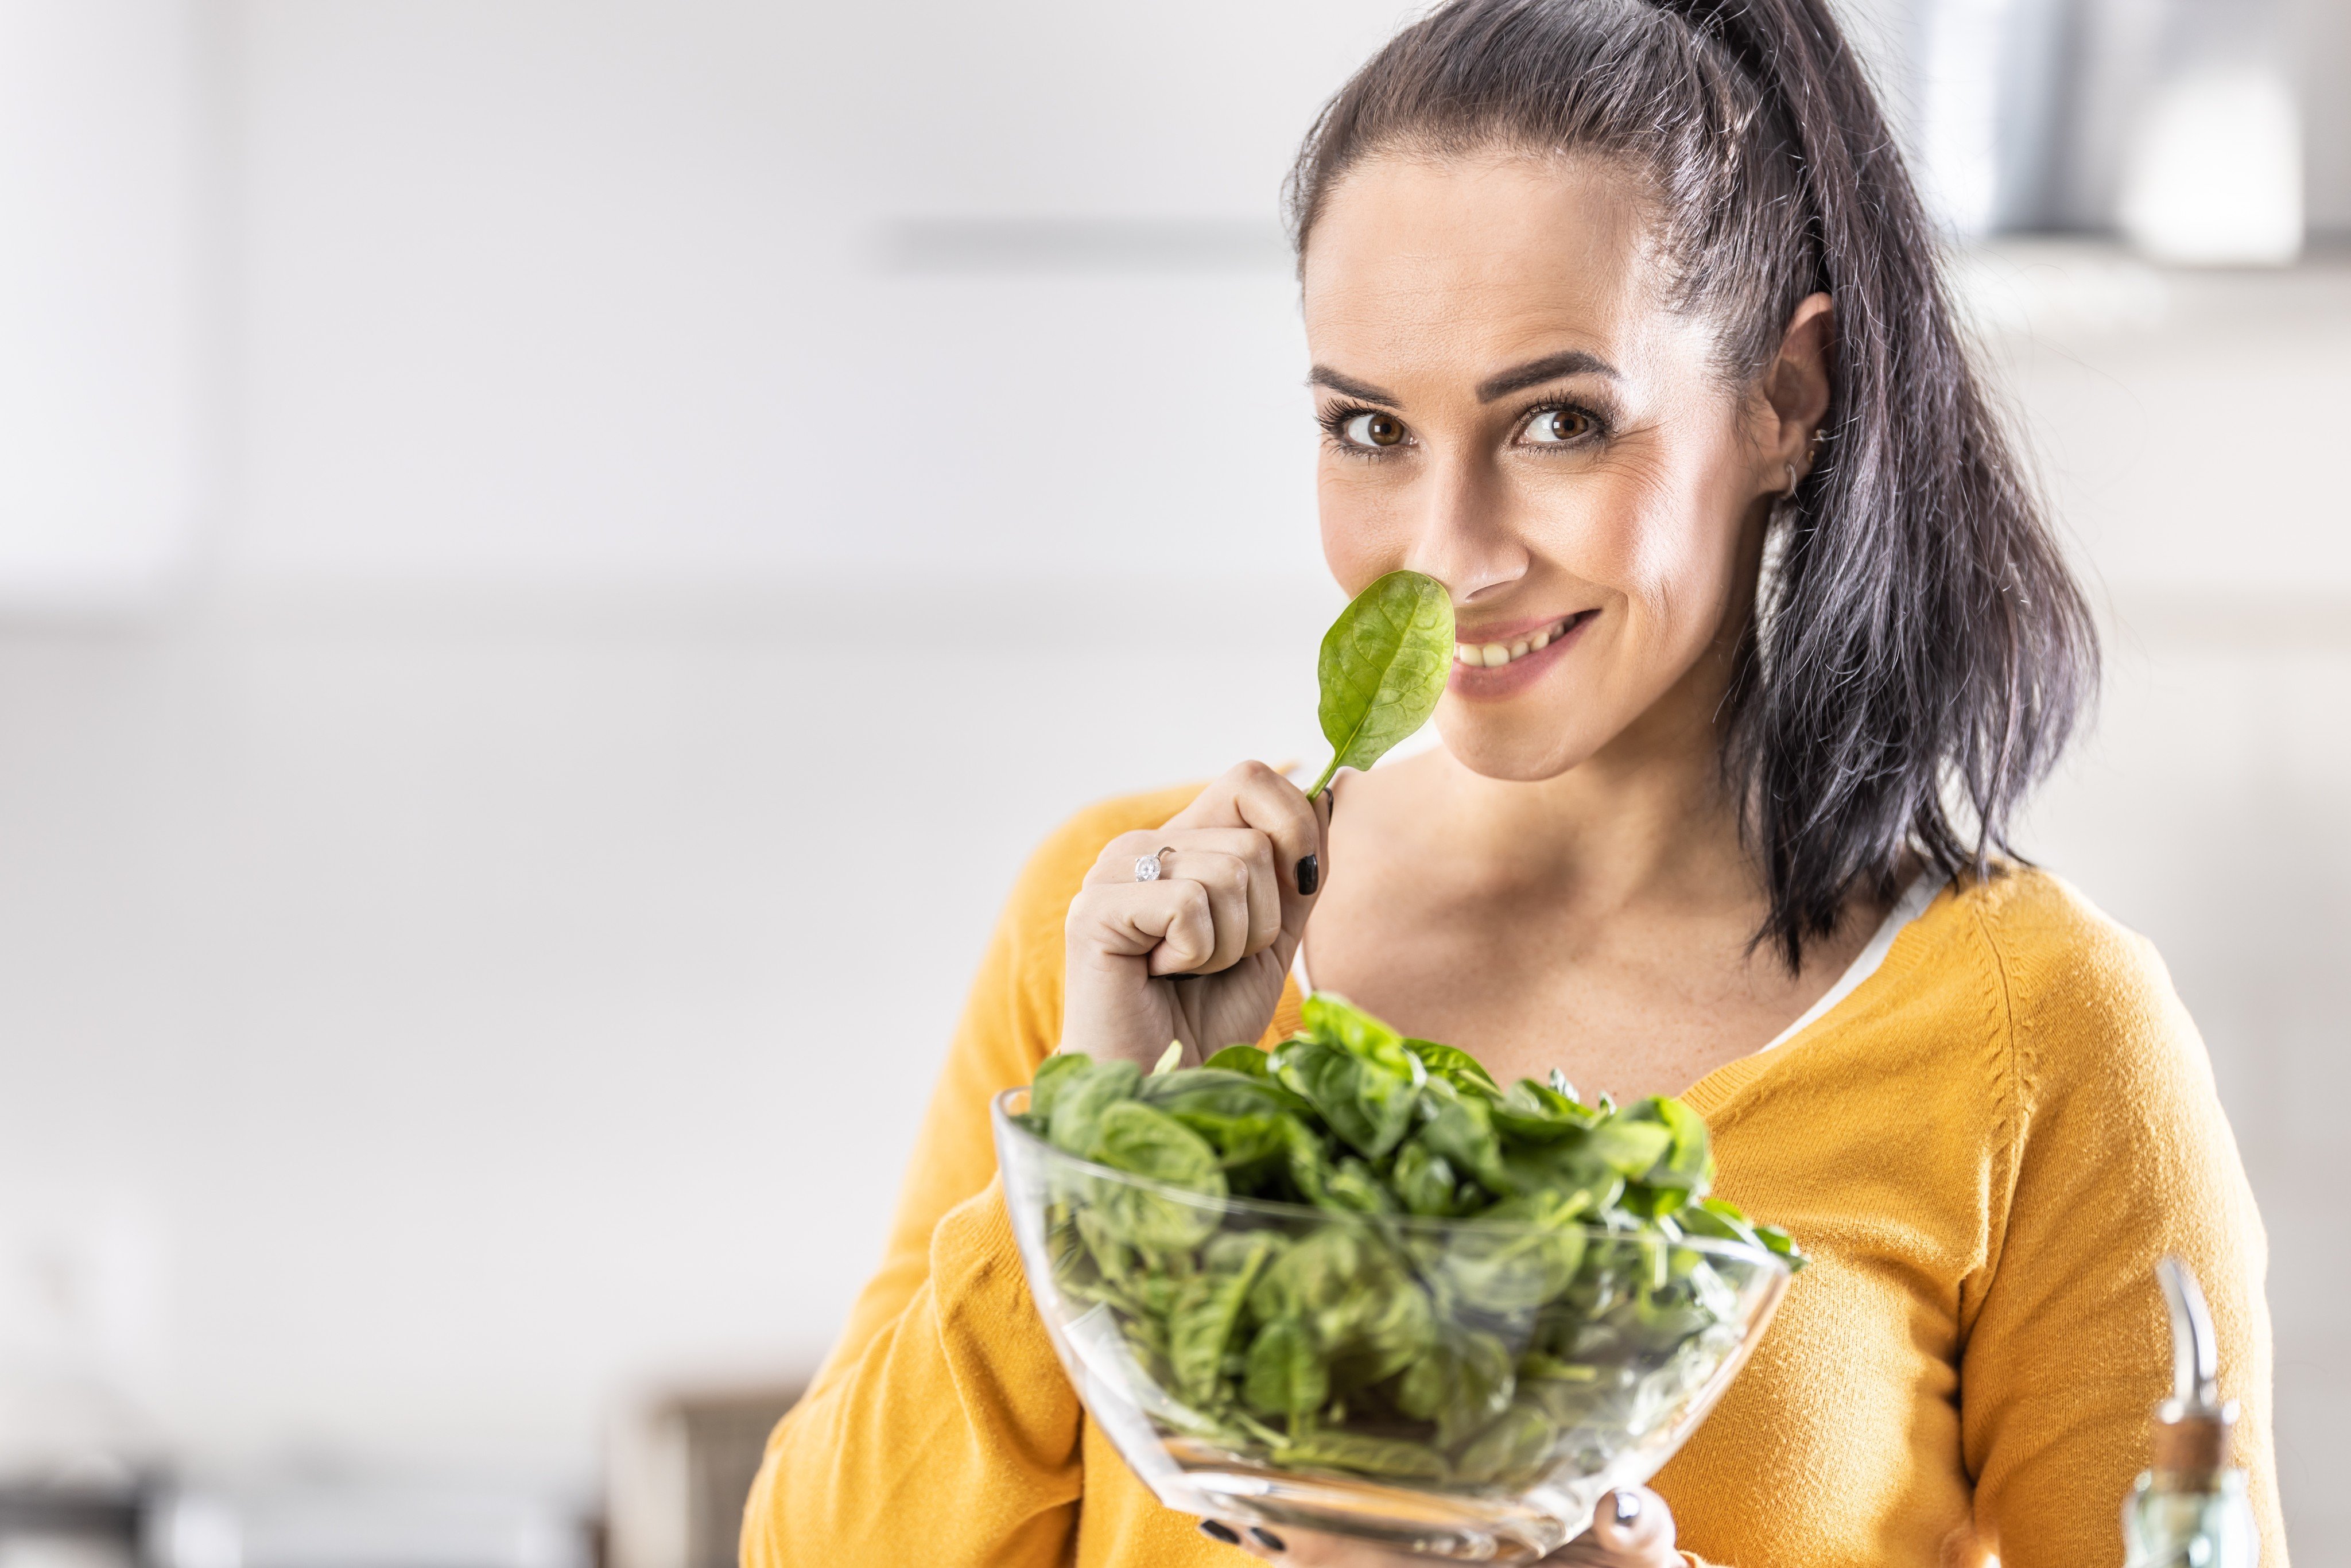 Spinach is full of health benefits no matter how you like to prepare it, one expert says. Among all the leafy green powerhouses, it packs a wallop in vitamins, fibre, magnesium, potassium and iron. Photo: Shutterstock